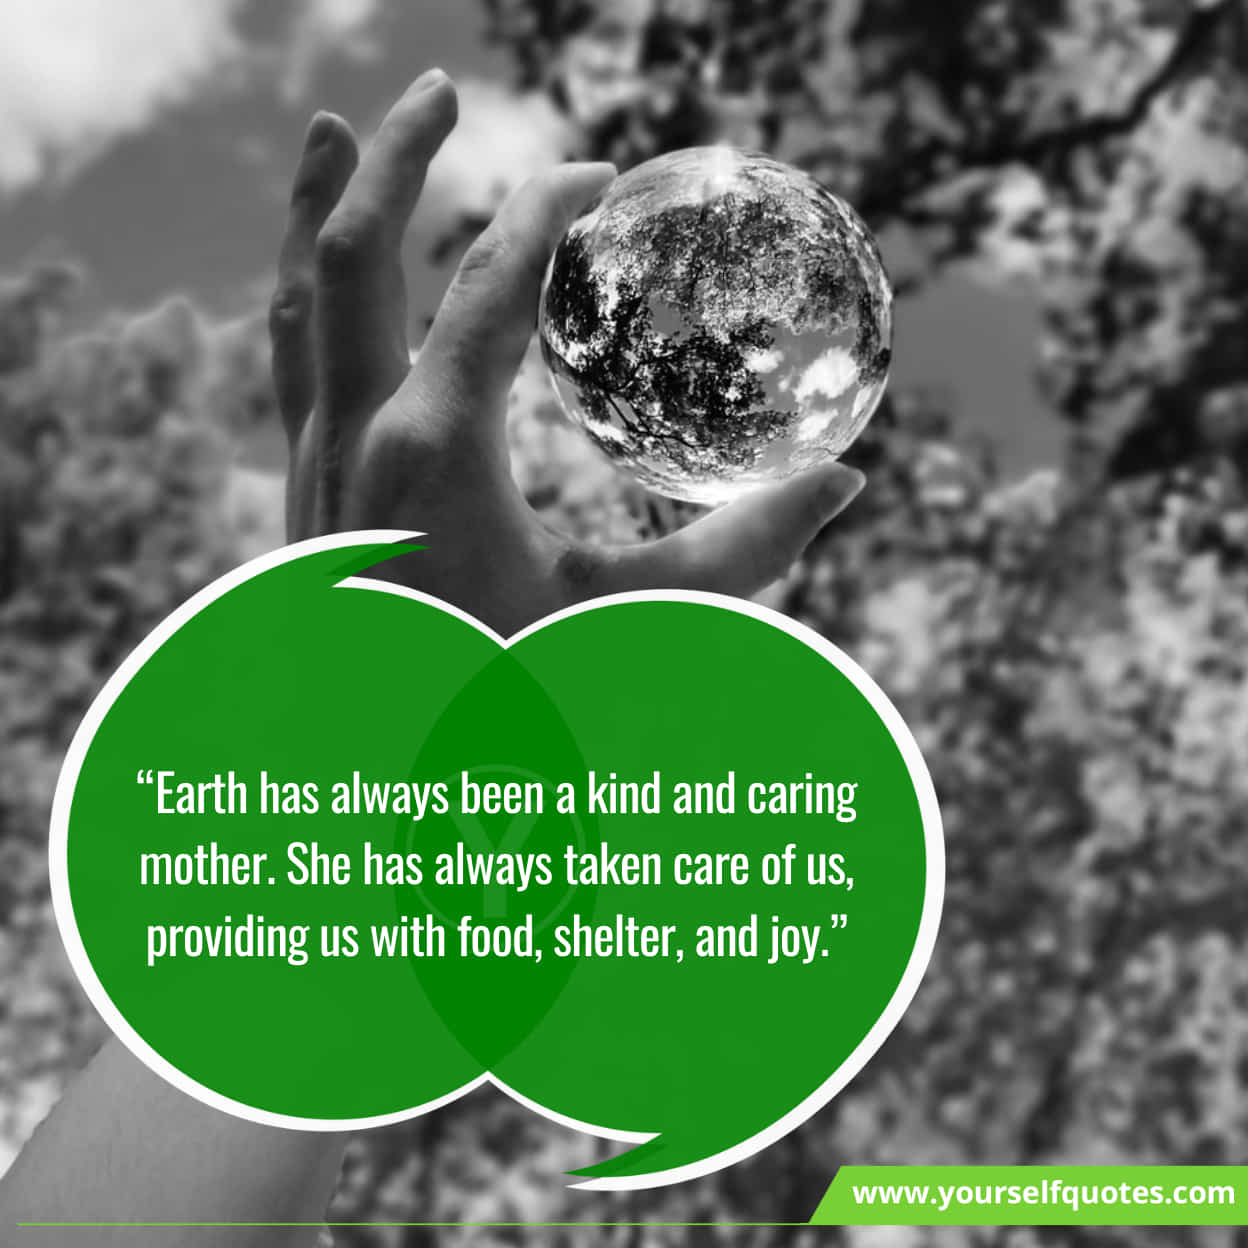 Inspiring Quotes On Earth Day